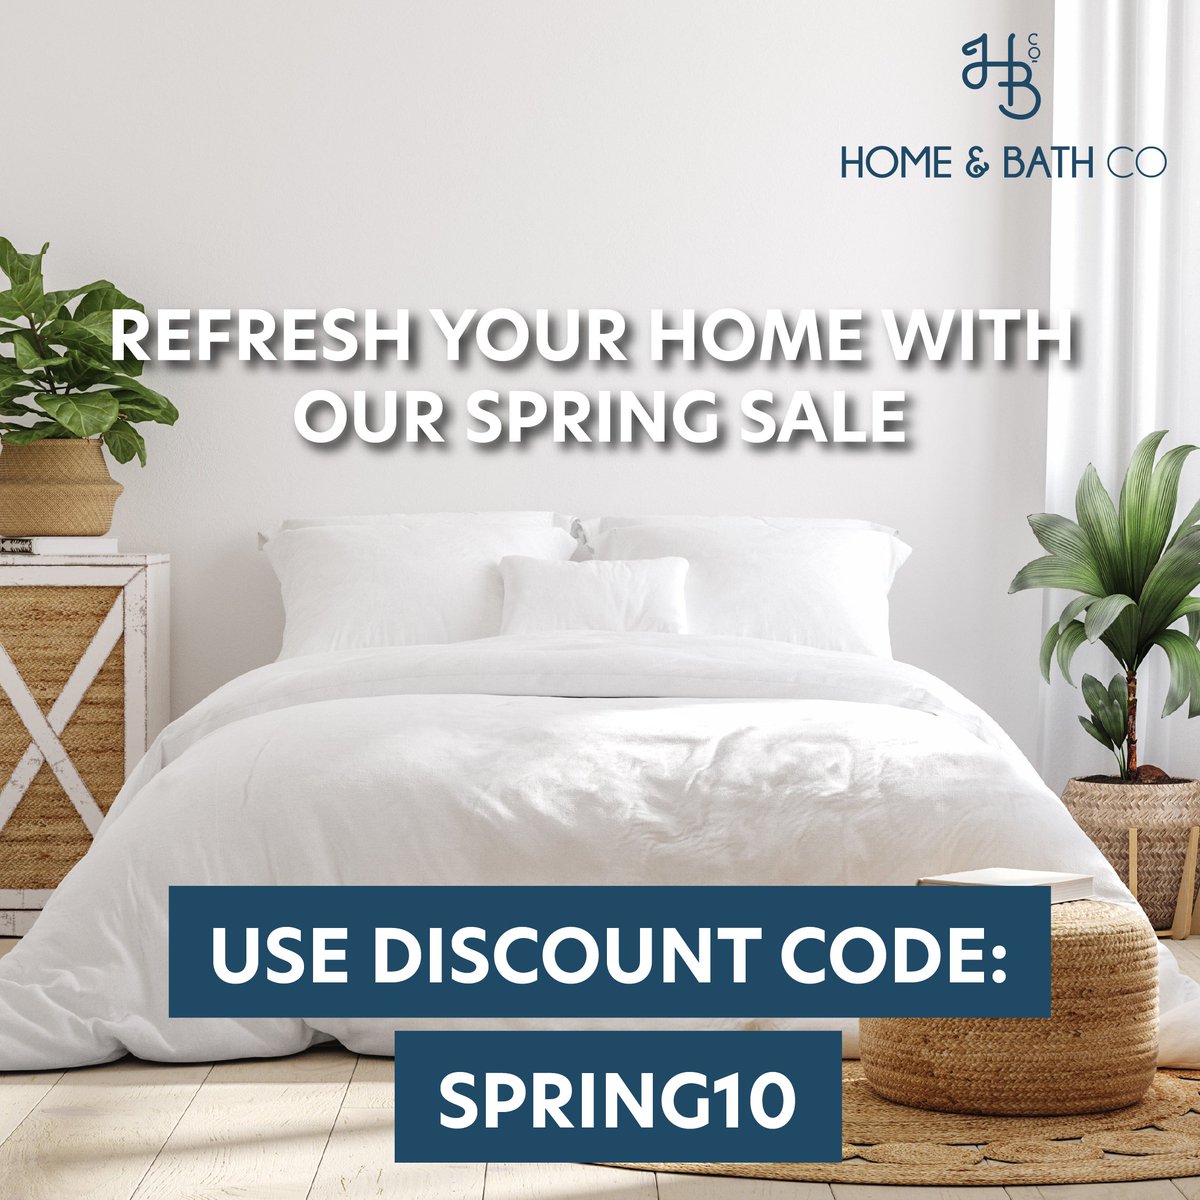 Shop our Spring sale to give your home the reset it's missing 💐

#sale #springsale #duvetcovers #pillows #dealsuk